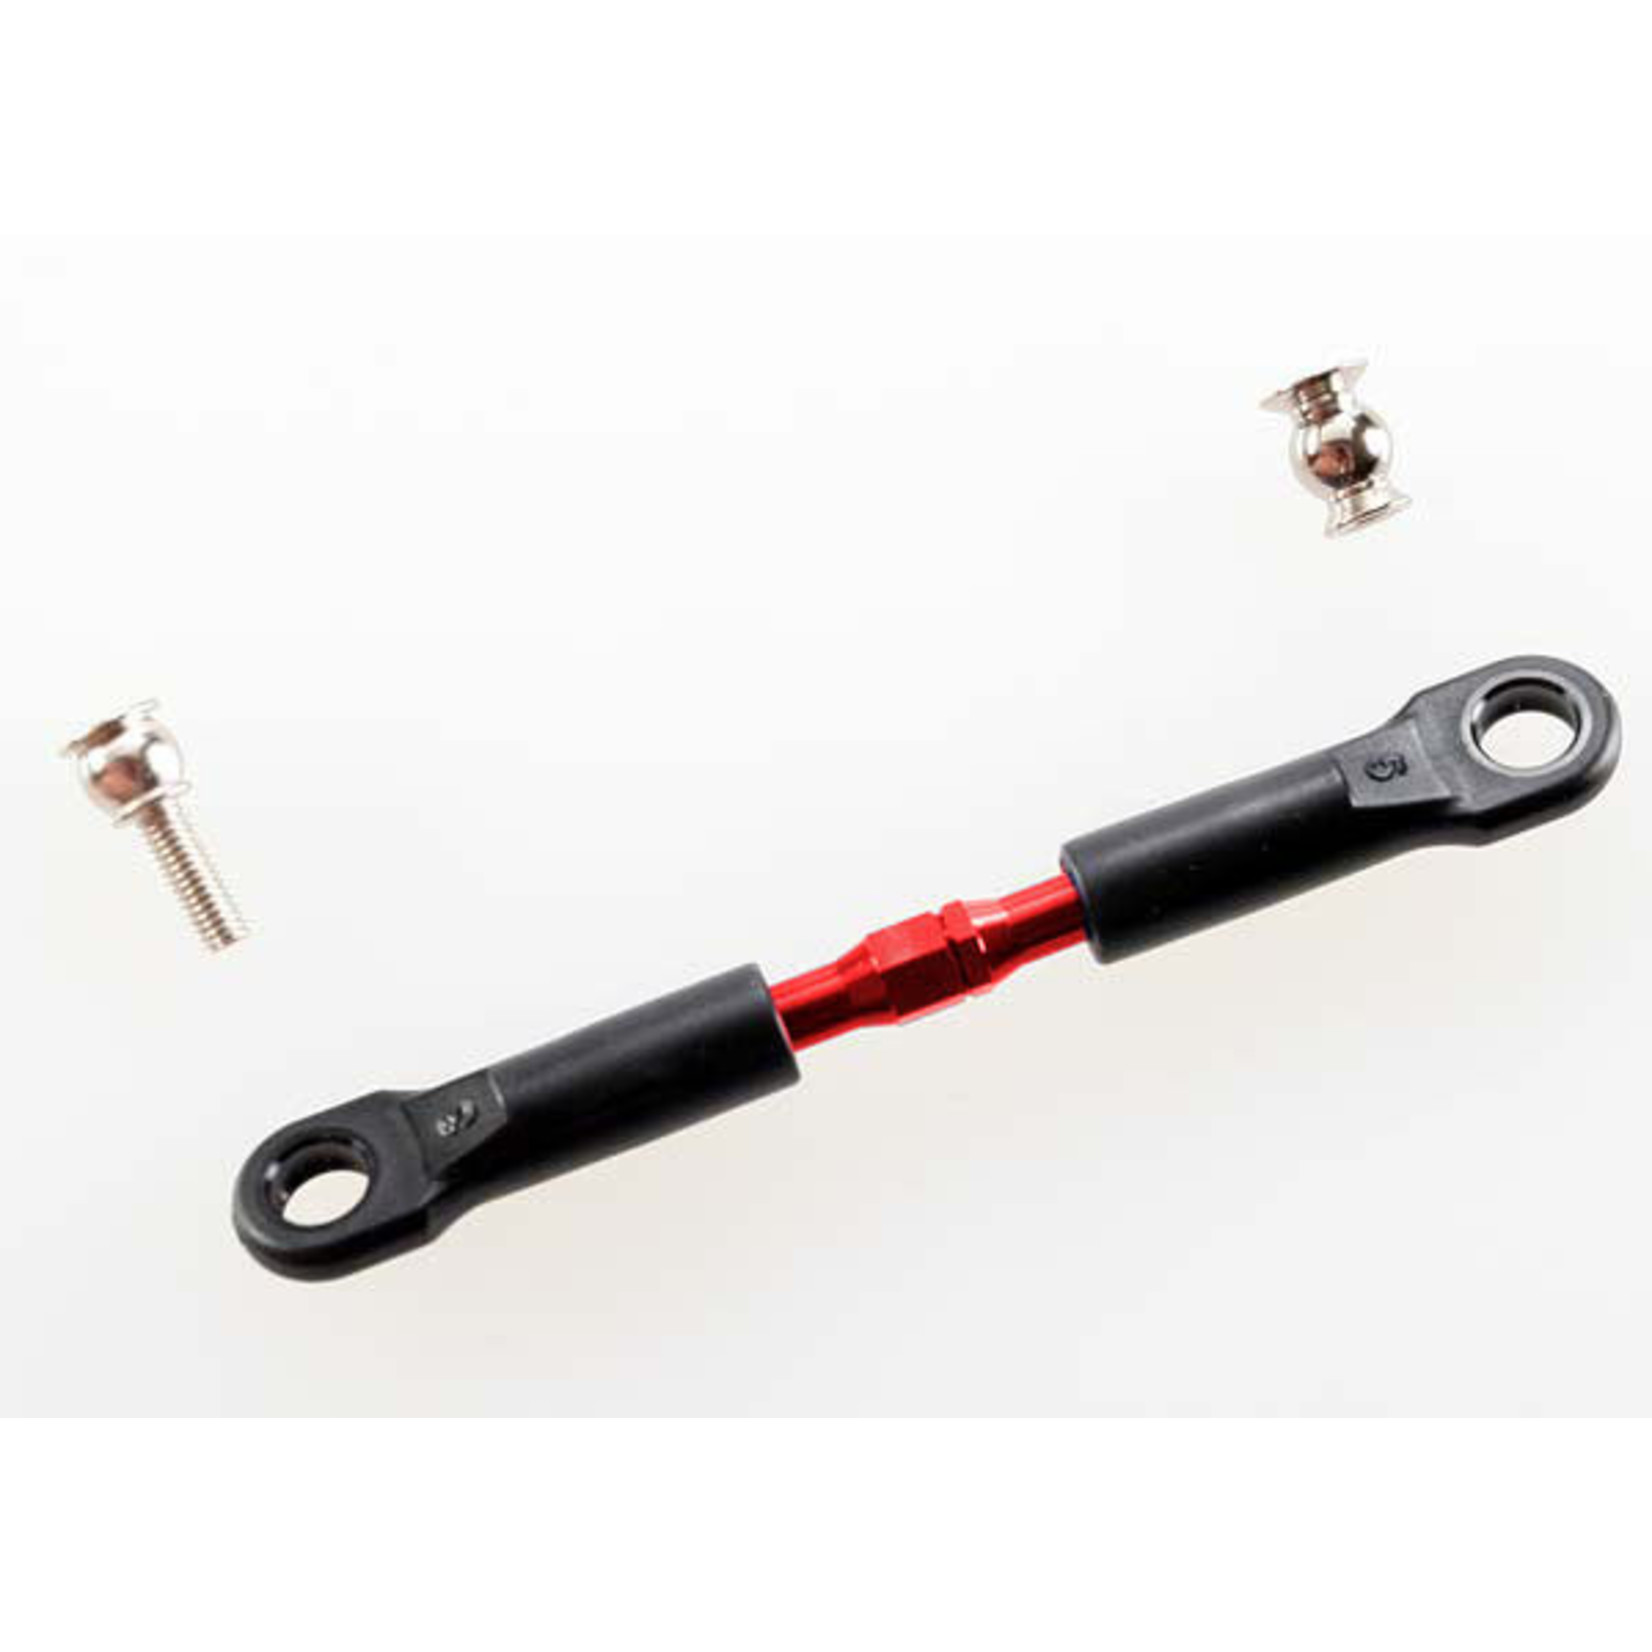 Traxxas 3737 - Turnbuckle, aluminum (red-anodized), camber